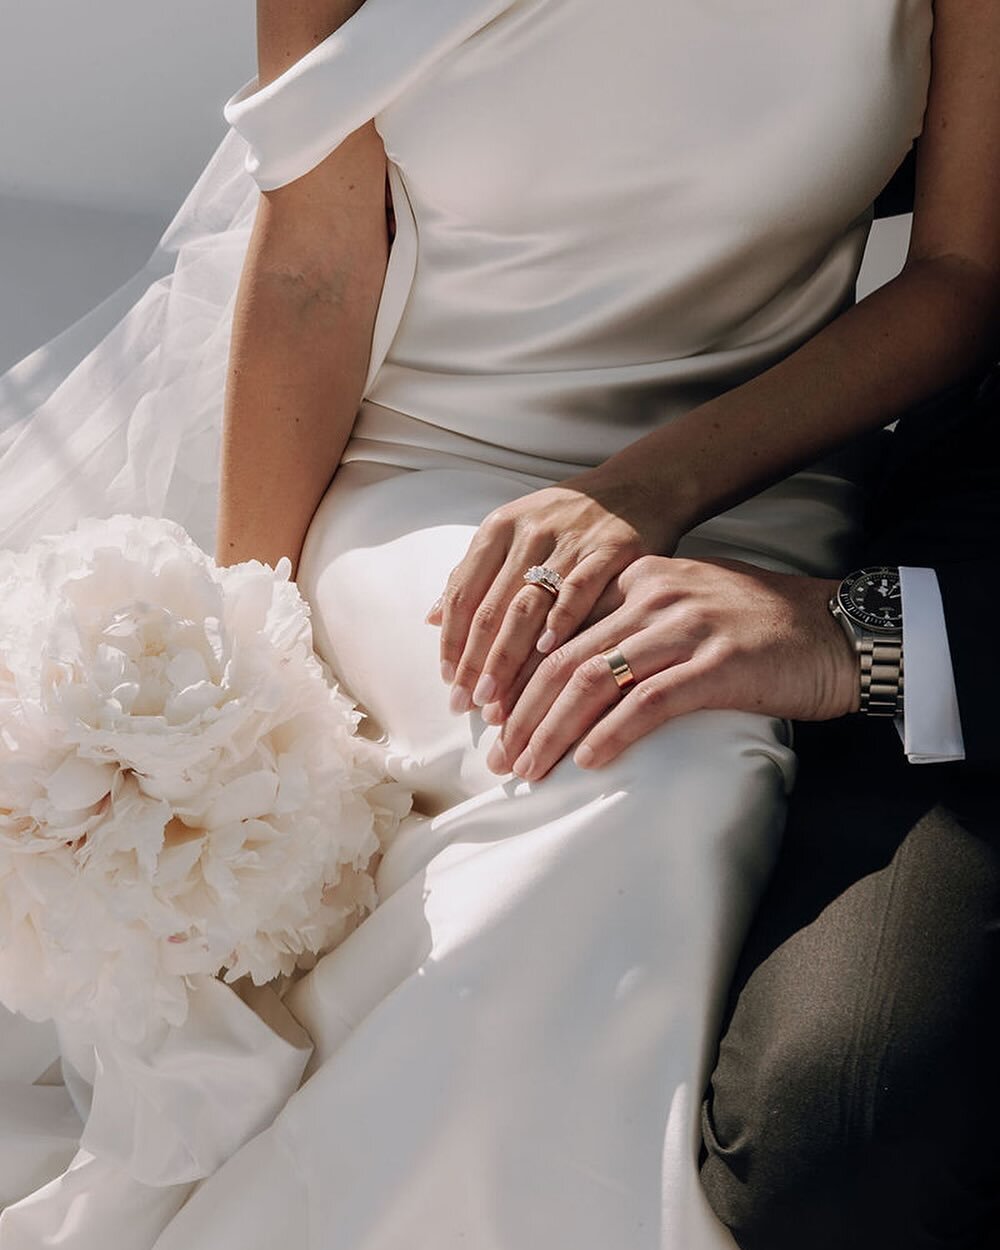 Jena&rsquo;s silk satin gown captured by @sapphirestudios___ 🤍

This beautiful wedding featured over on @togetherjournal